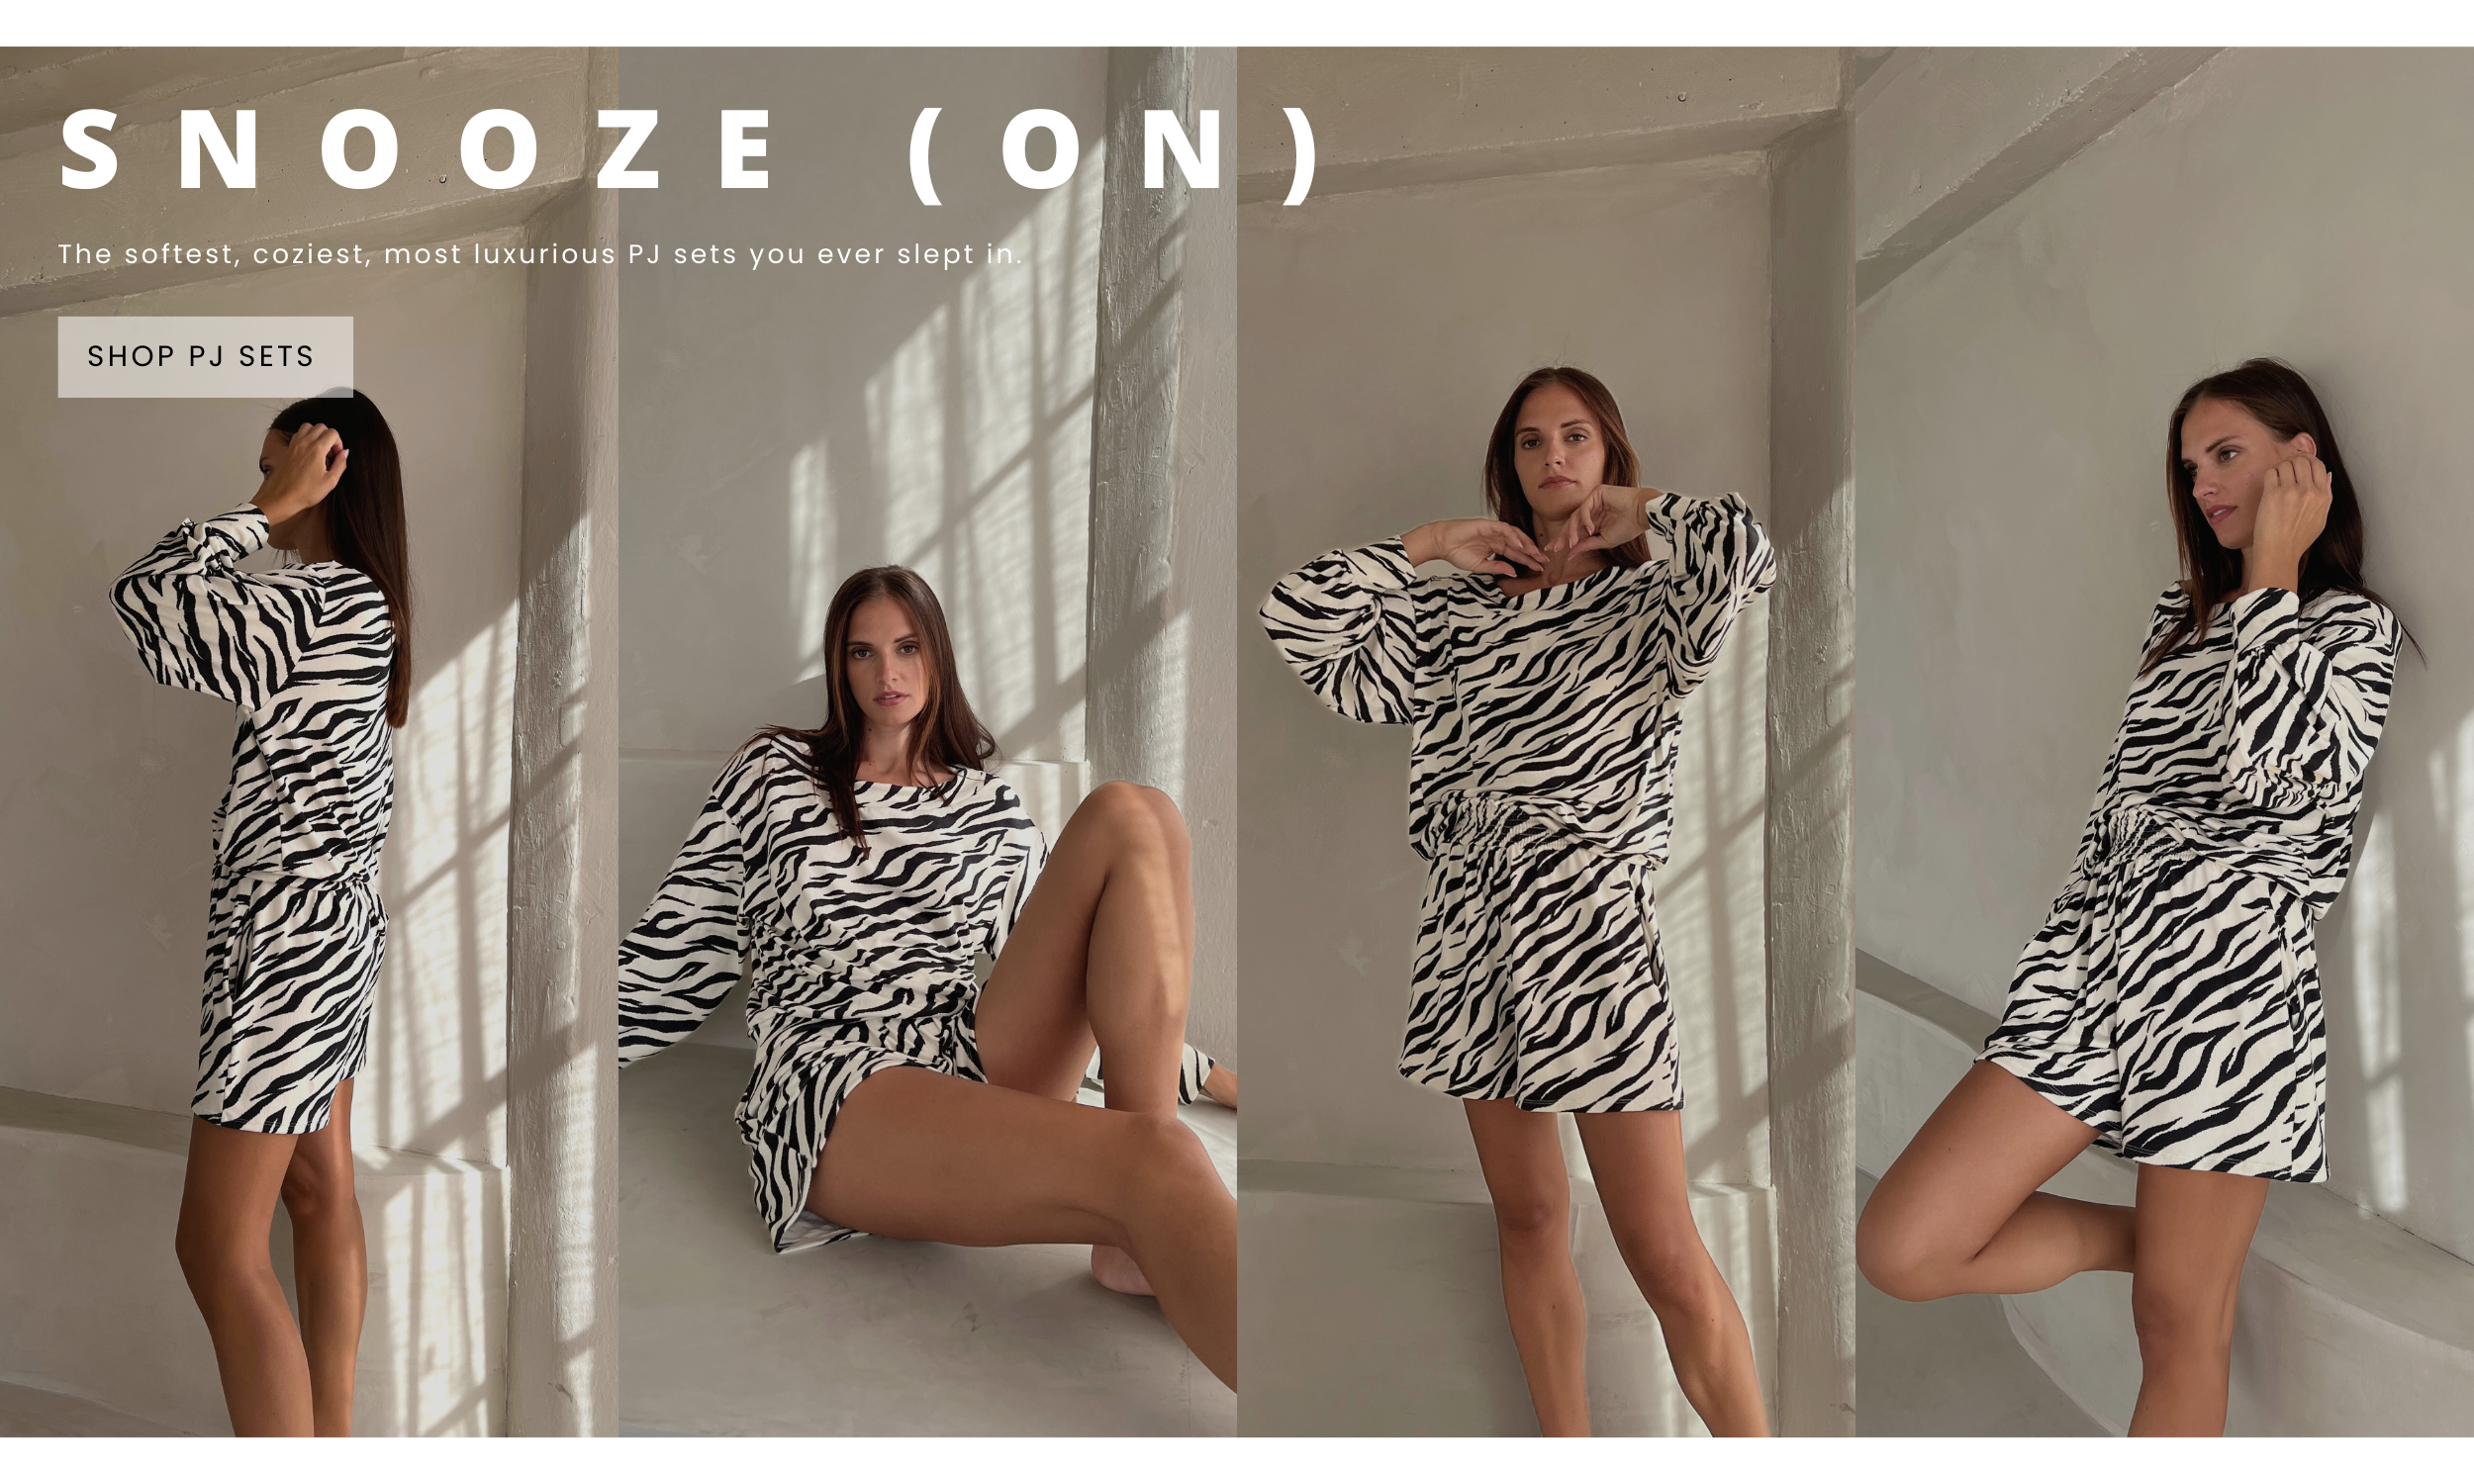 Snooze On.  The softest, coziest, most luxurious pj sets you ever slept in.  Shop PJ Sets now.  